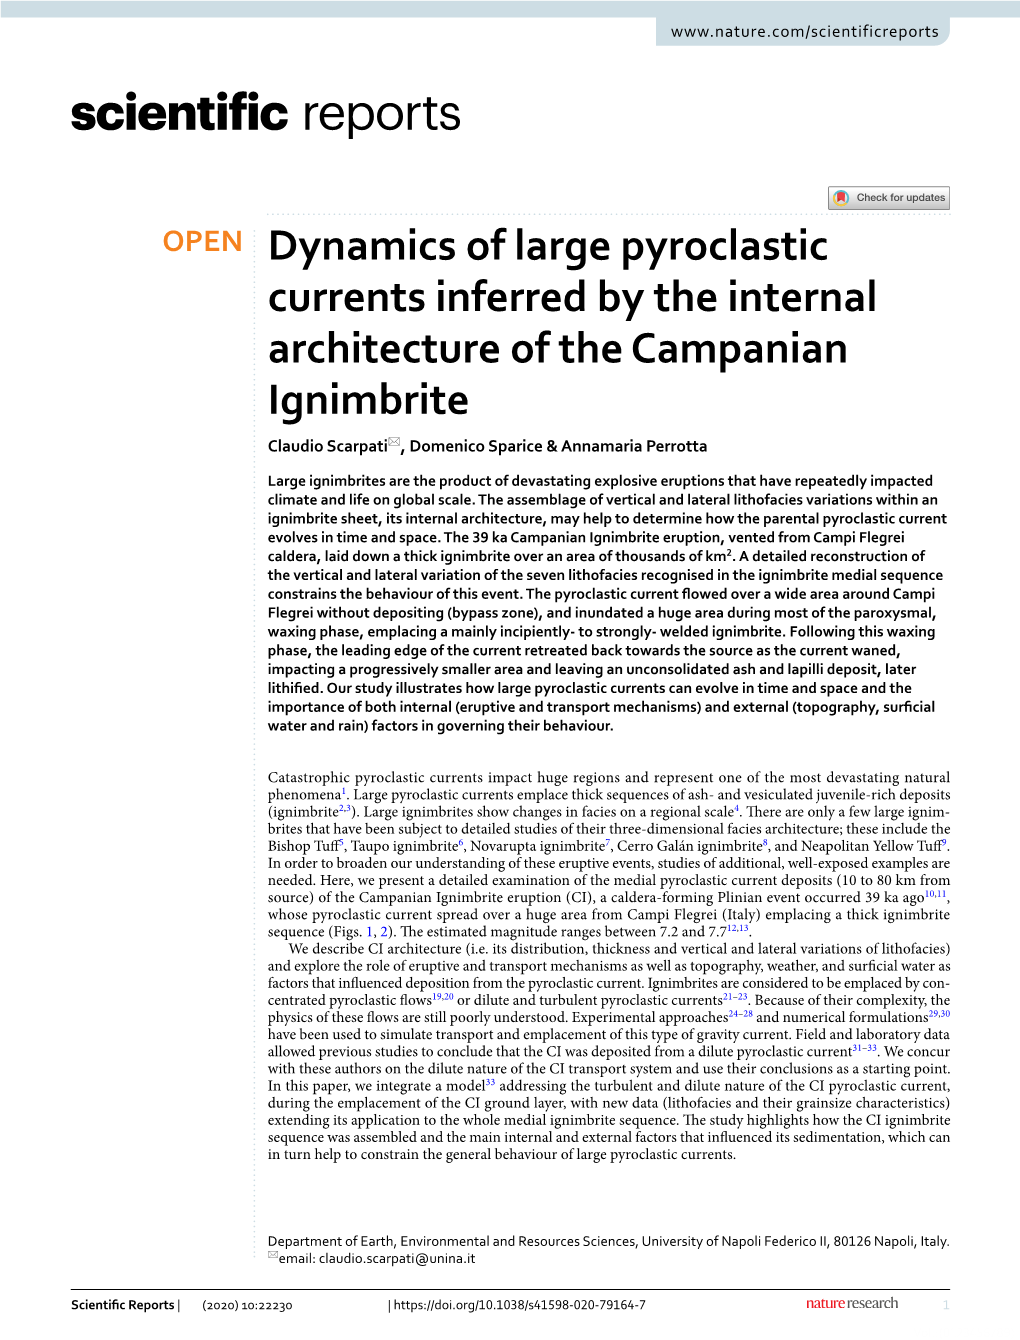 Dynamics of Large Pyroclastic Currents Inferred by the Internal Architecture of the Campanian Ignimbrite Claudio Scarpati*, Domenico Sparice & Annamaria Perrotta